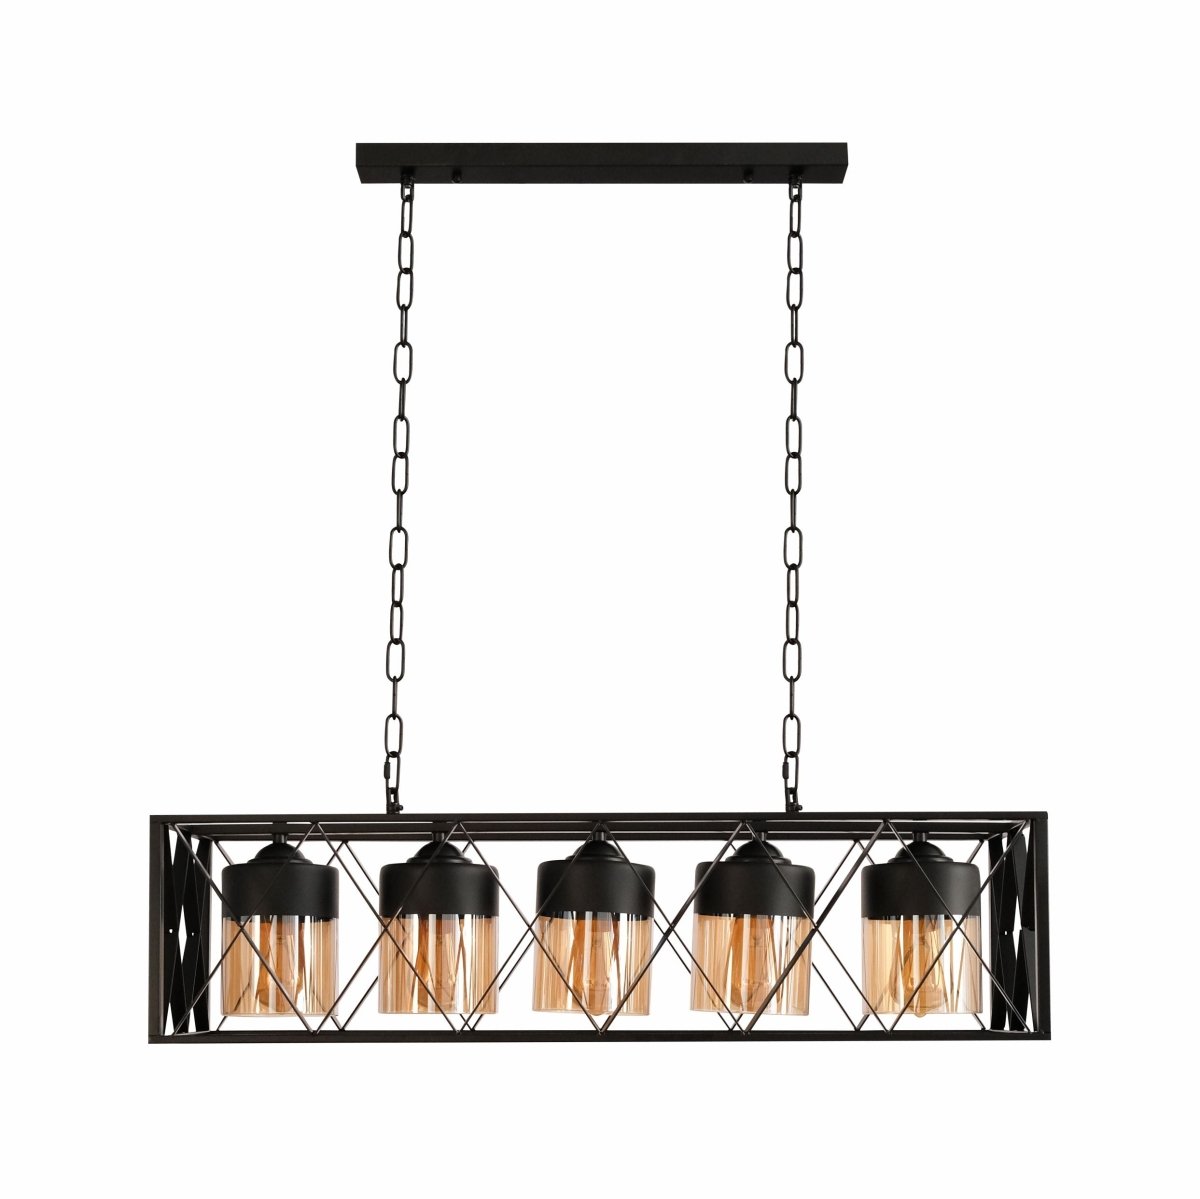 Main image of Black Caged Metal Amber Cylinder Glass Island Chandelier with 5xE27 Fitting | TEKLED 158-19580